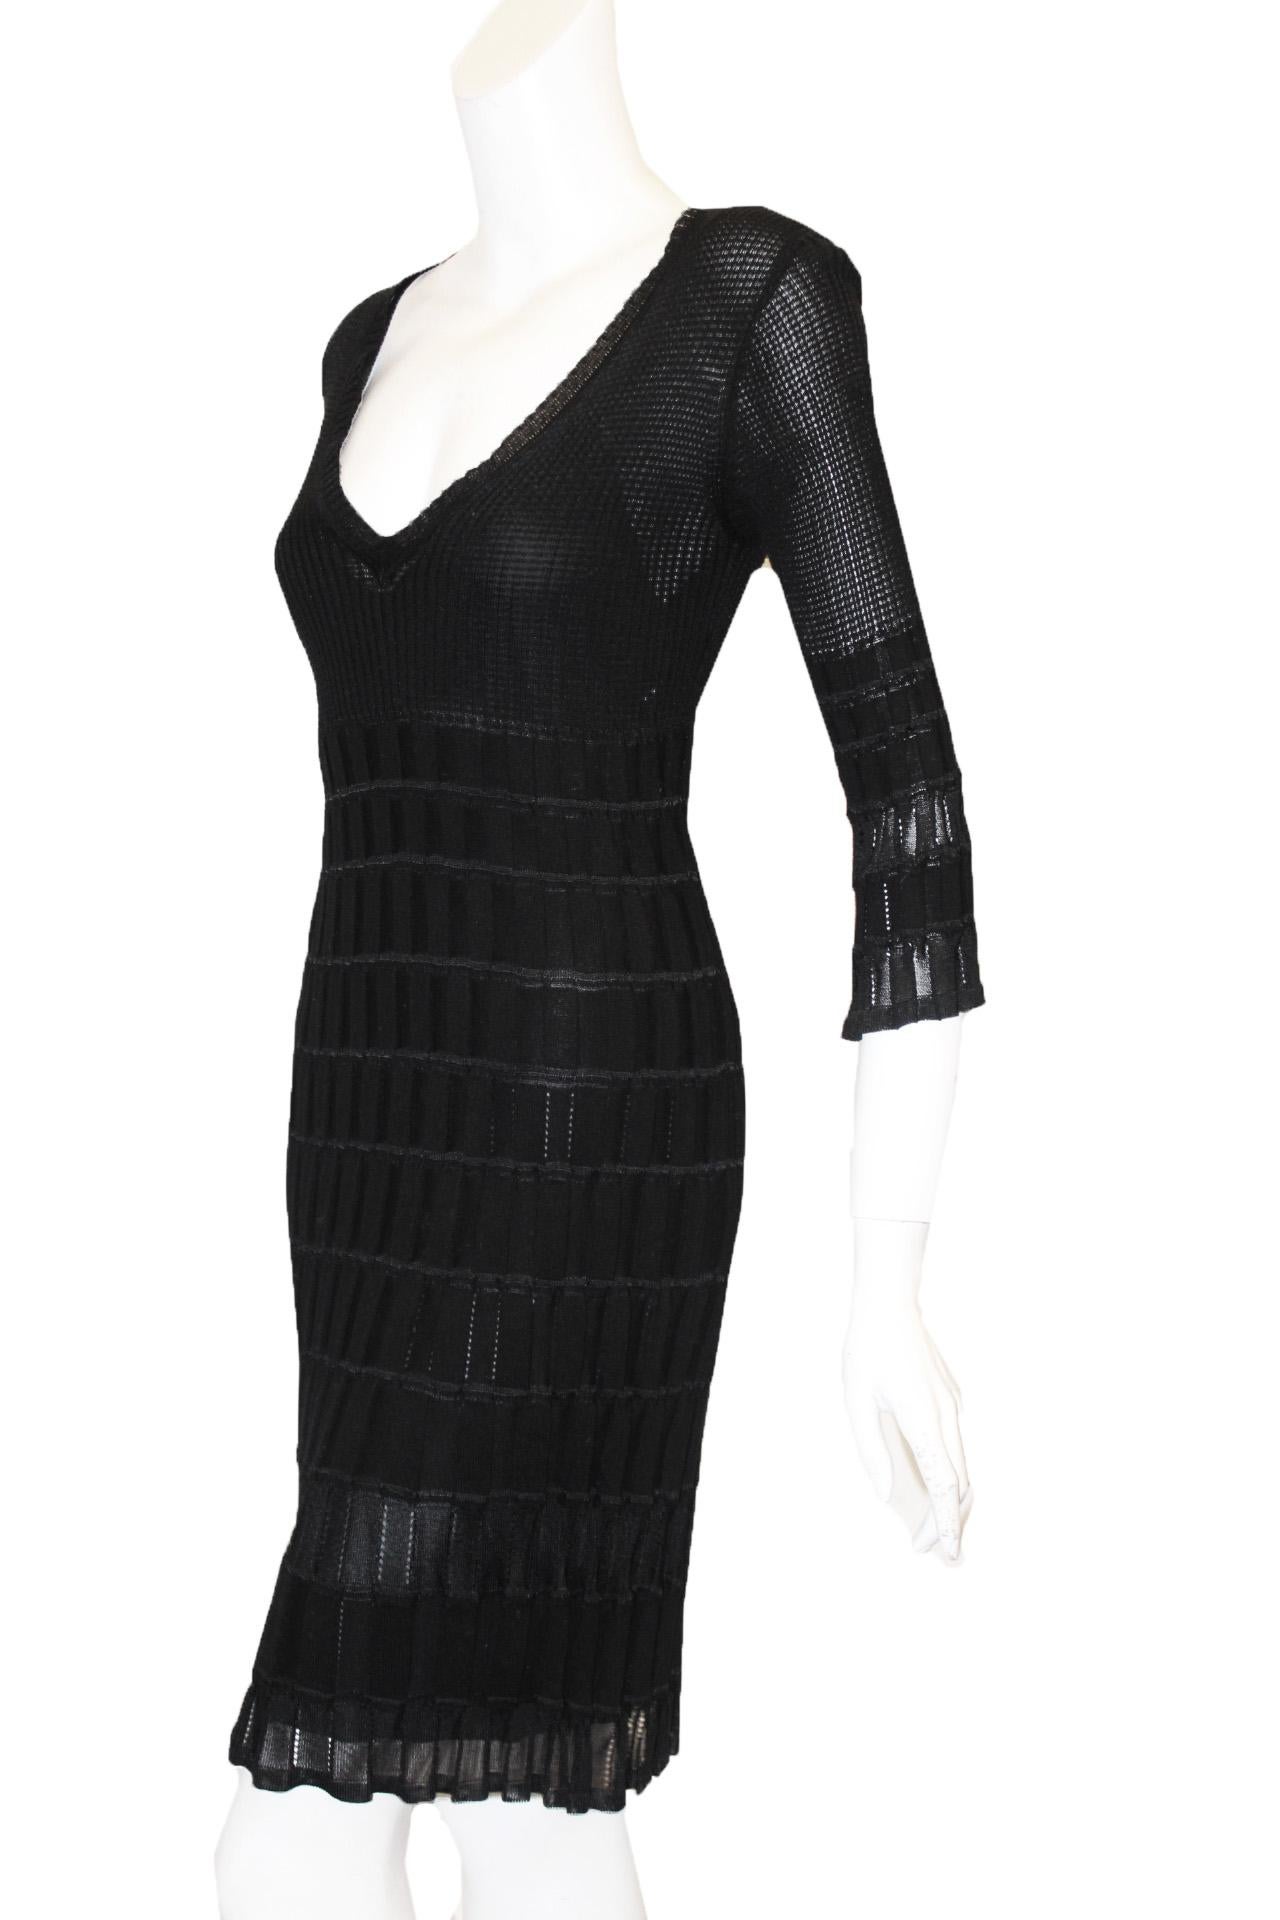 Missoni Black Knit Dress with 3/4 Sleeve In Excellent Condition For Sale In Palm Beach, FL